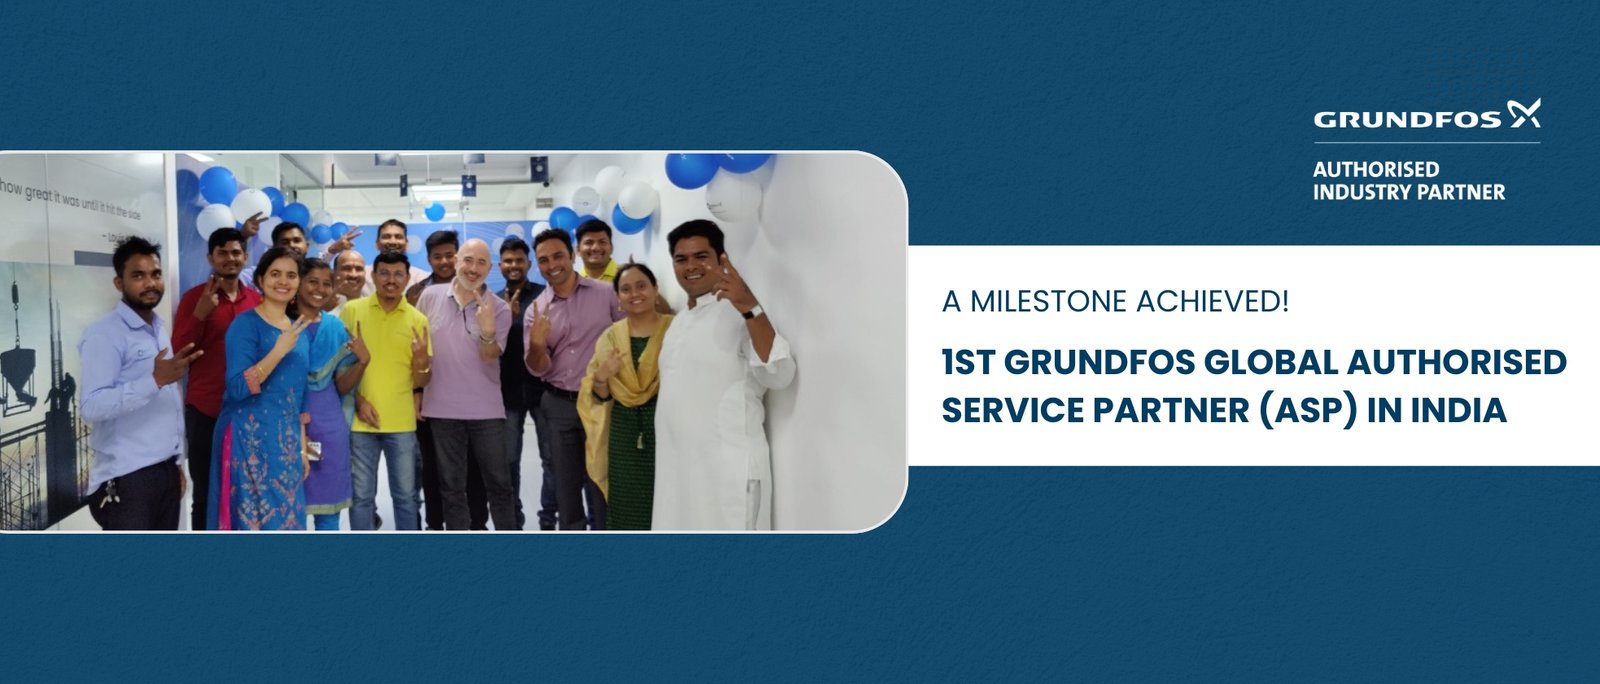 1st Grundfos Global Authorised Service Partner (ASP) in India